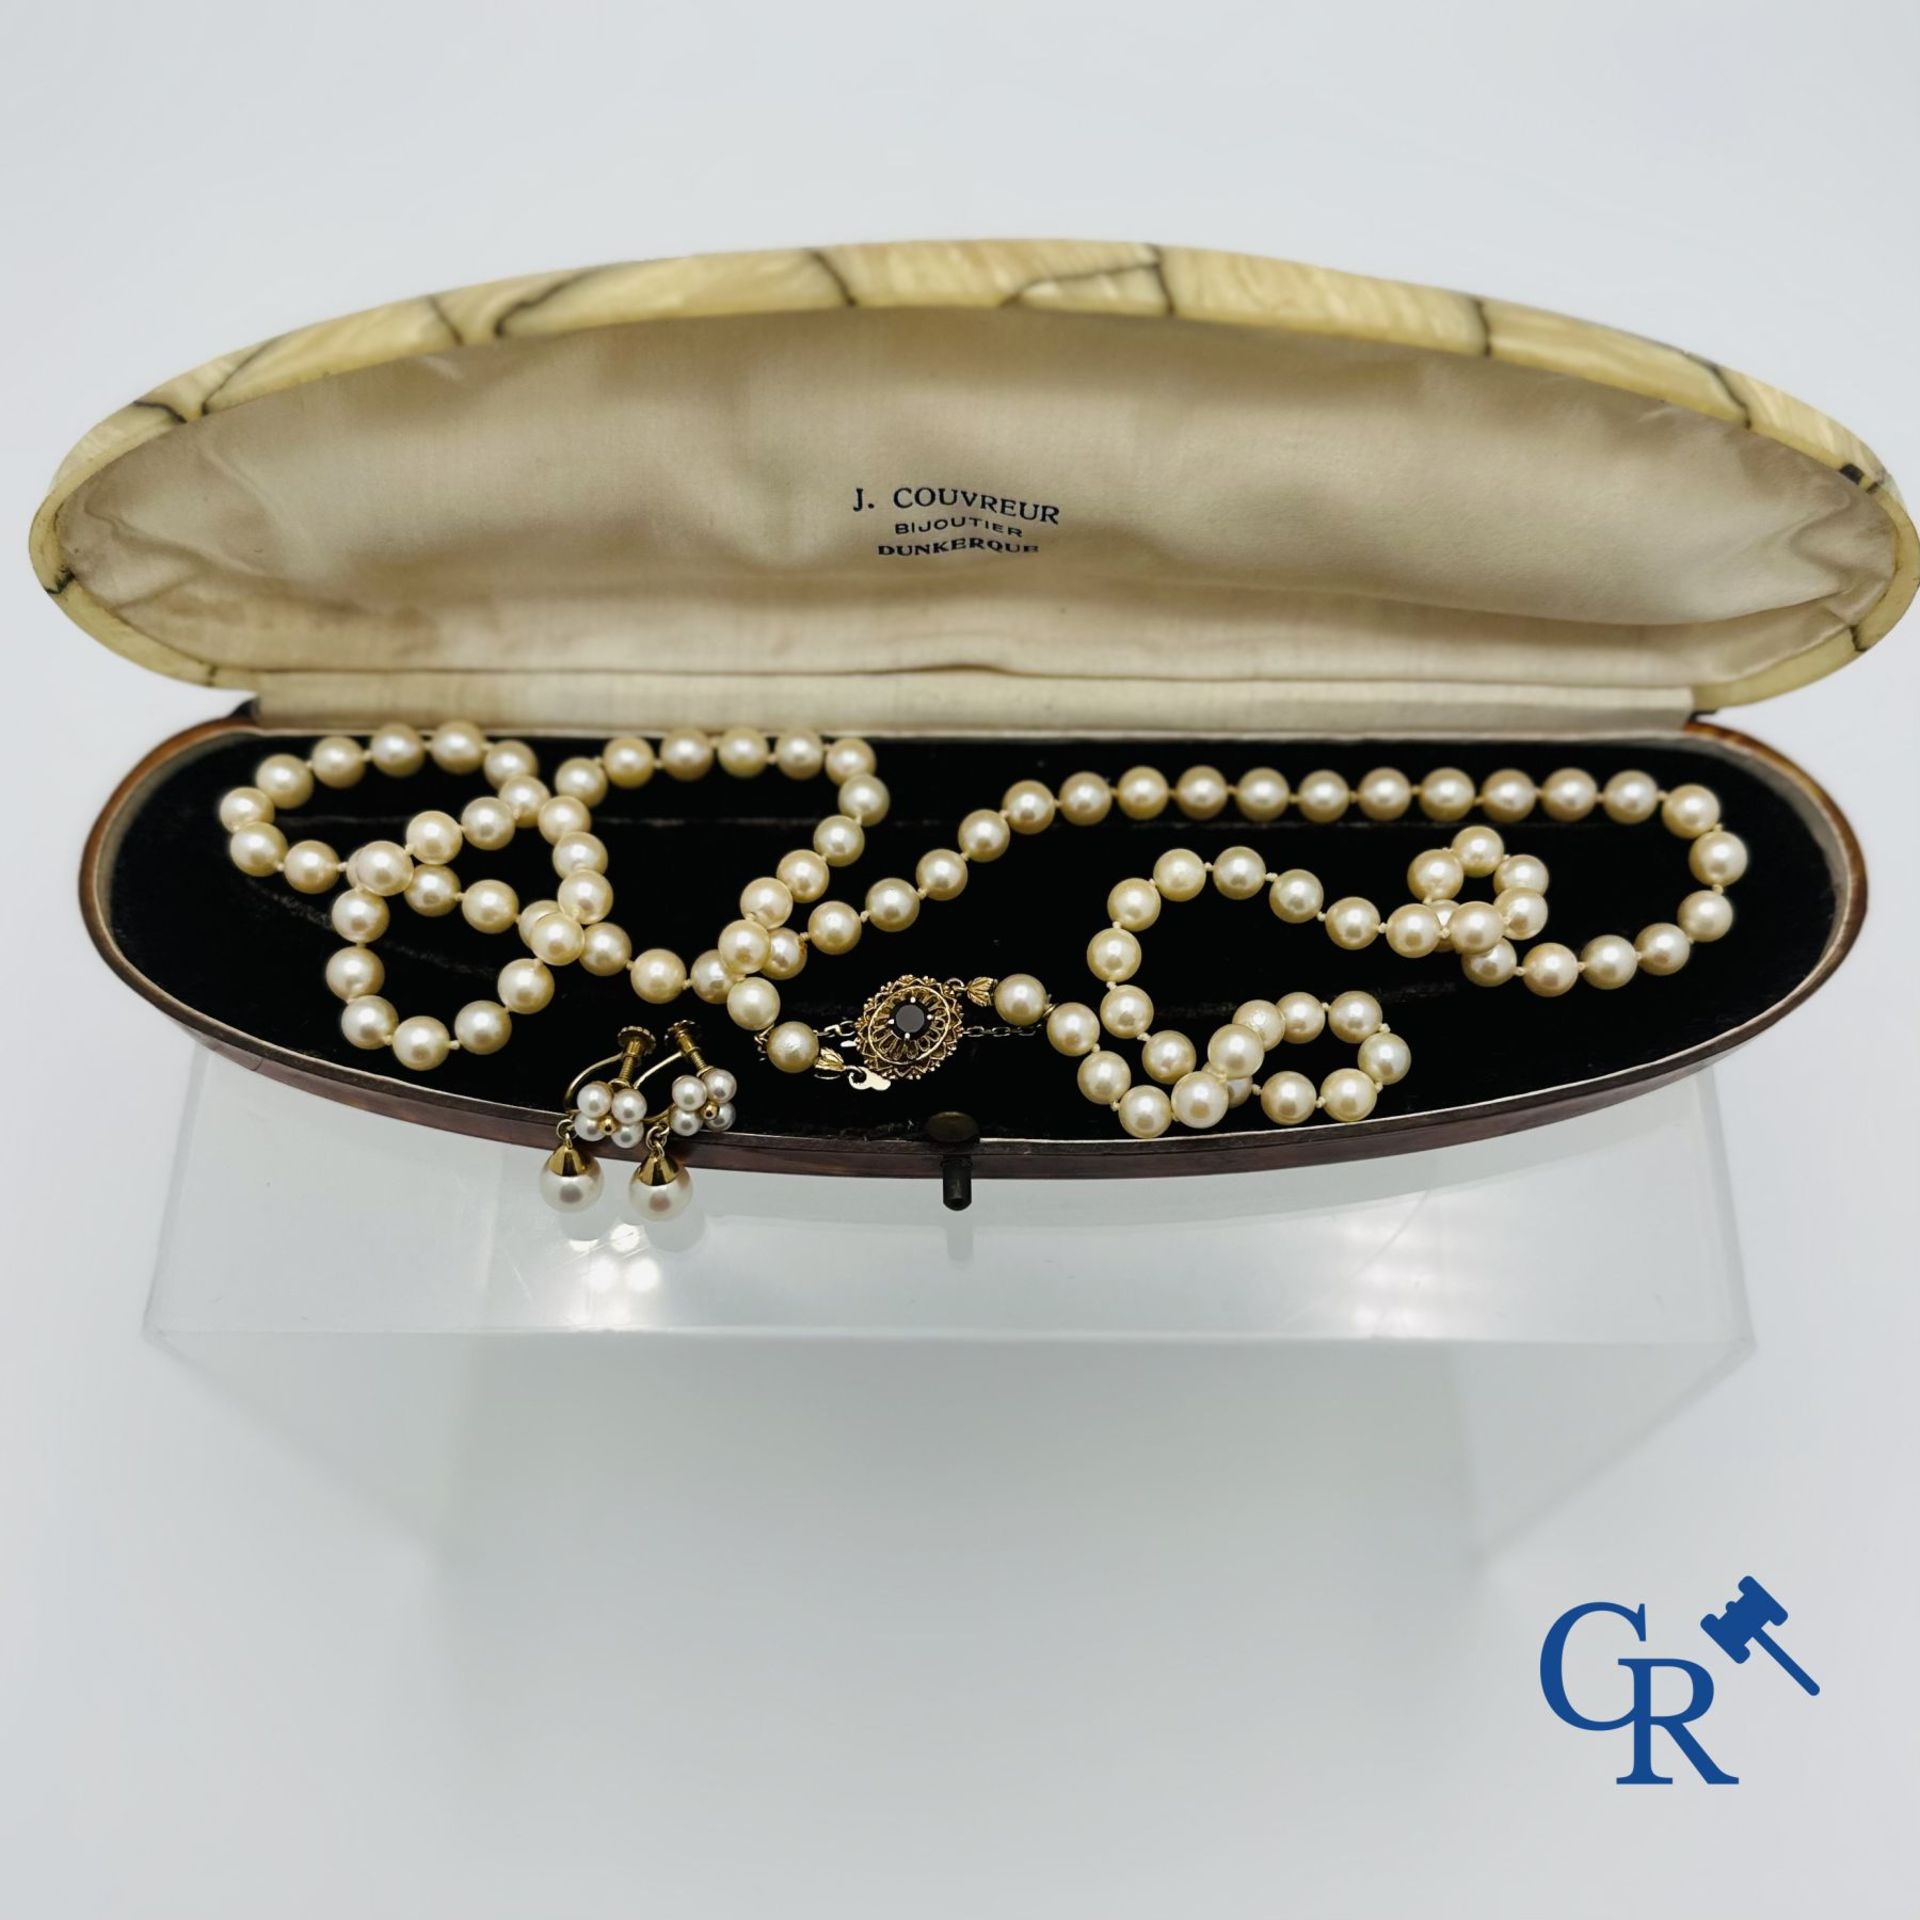 Jewellery: Lot consisting of a pearl necklace with gold clasp 18K and a pair of earrings in gold 18K - Image 2 of 6